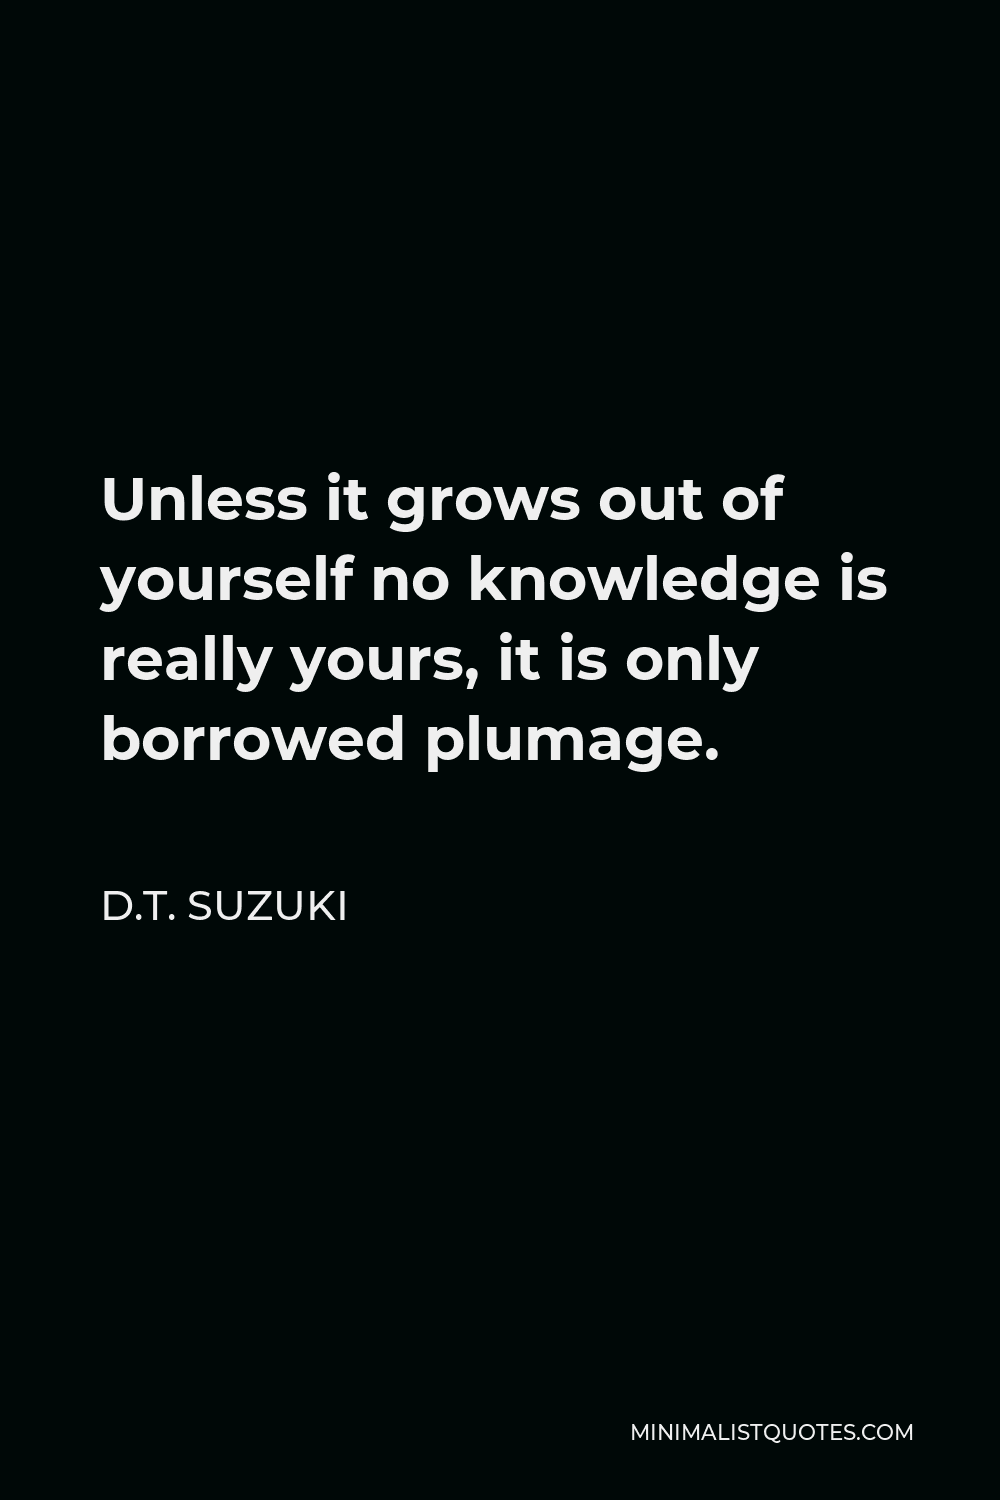 D.T. Suzuki Quote - Unless it grows out of yourself no knowledge is really yours, it is only borrowed plumage.